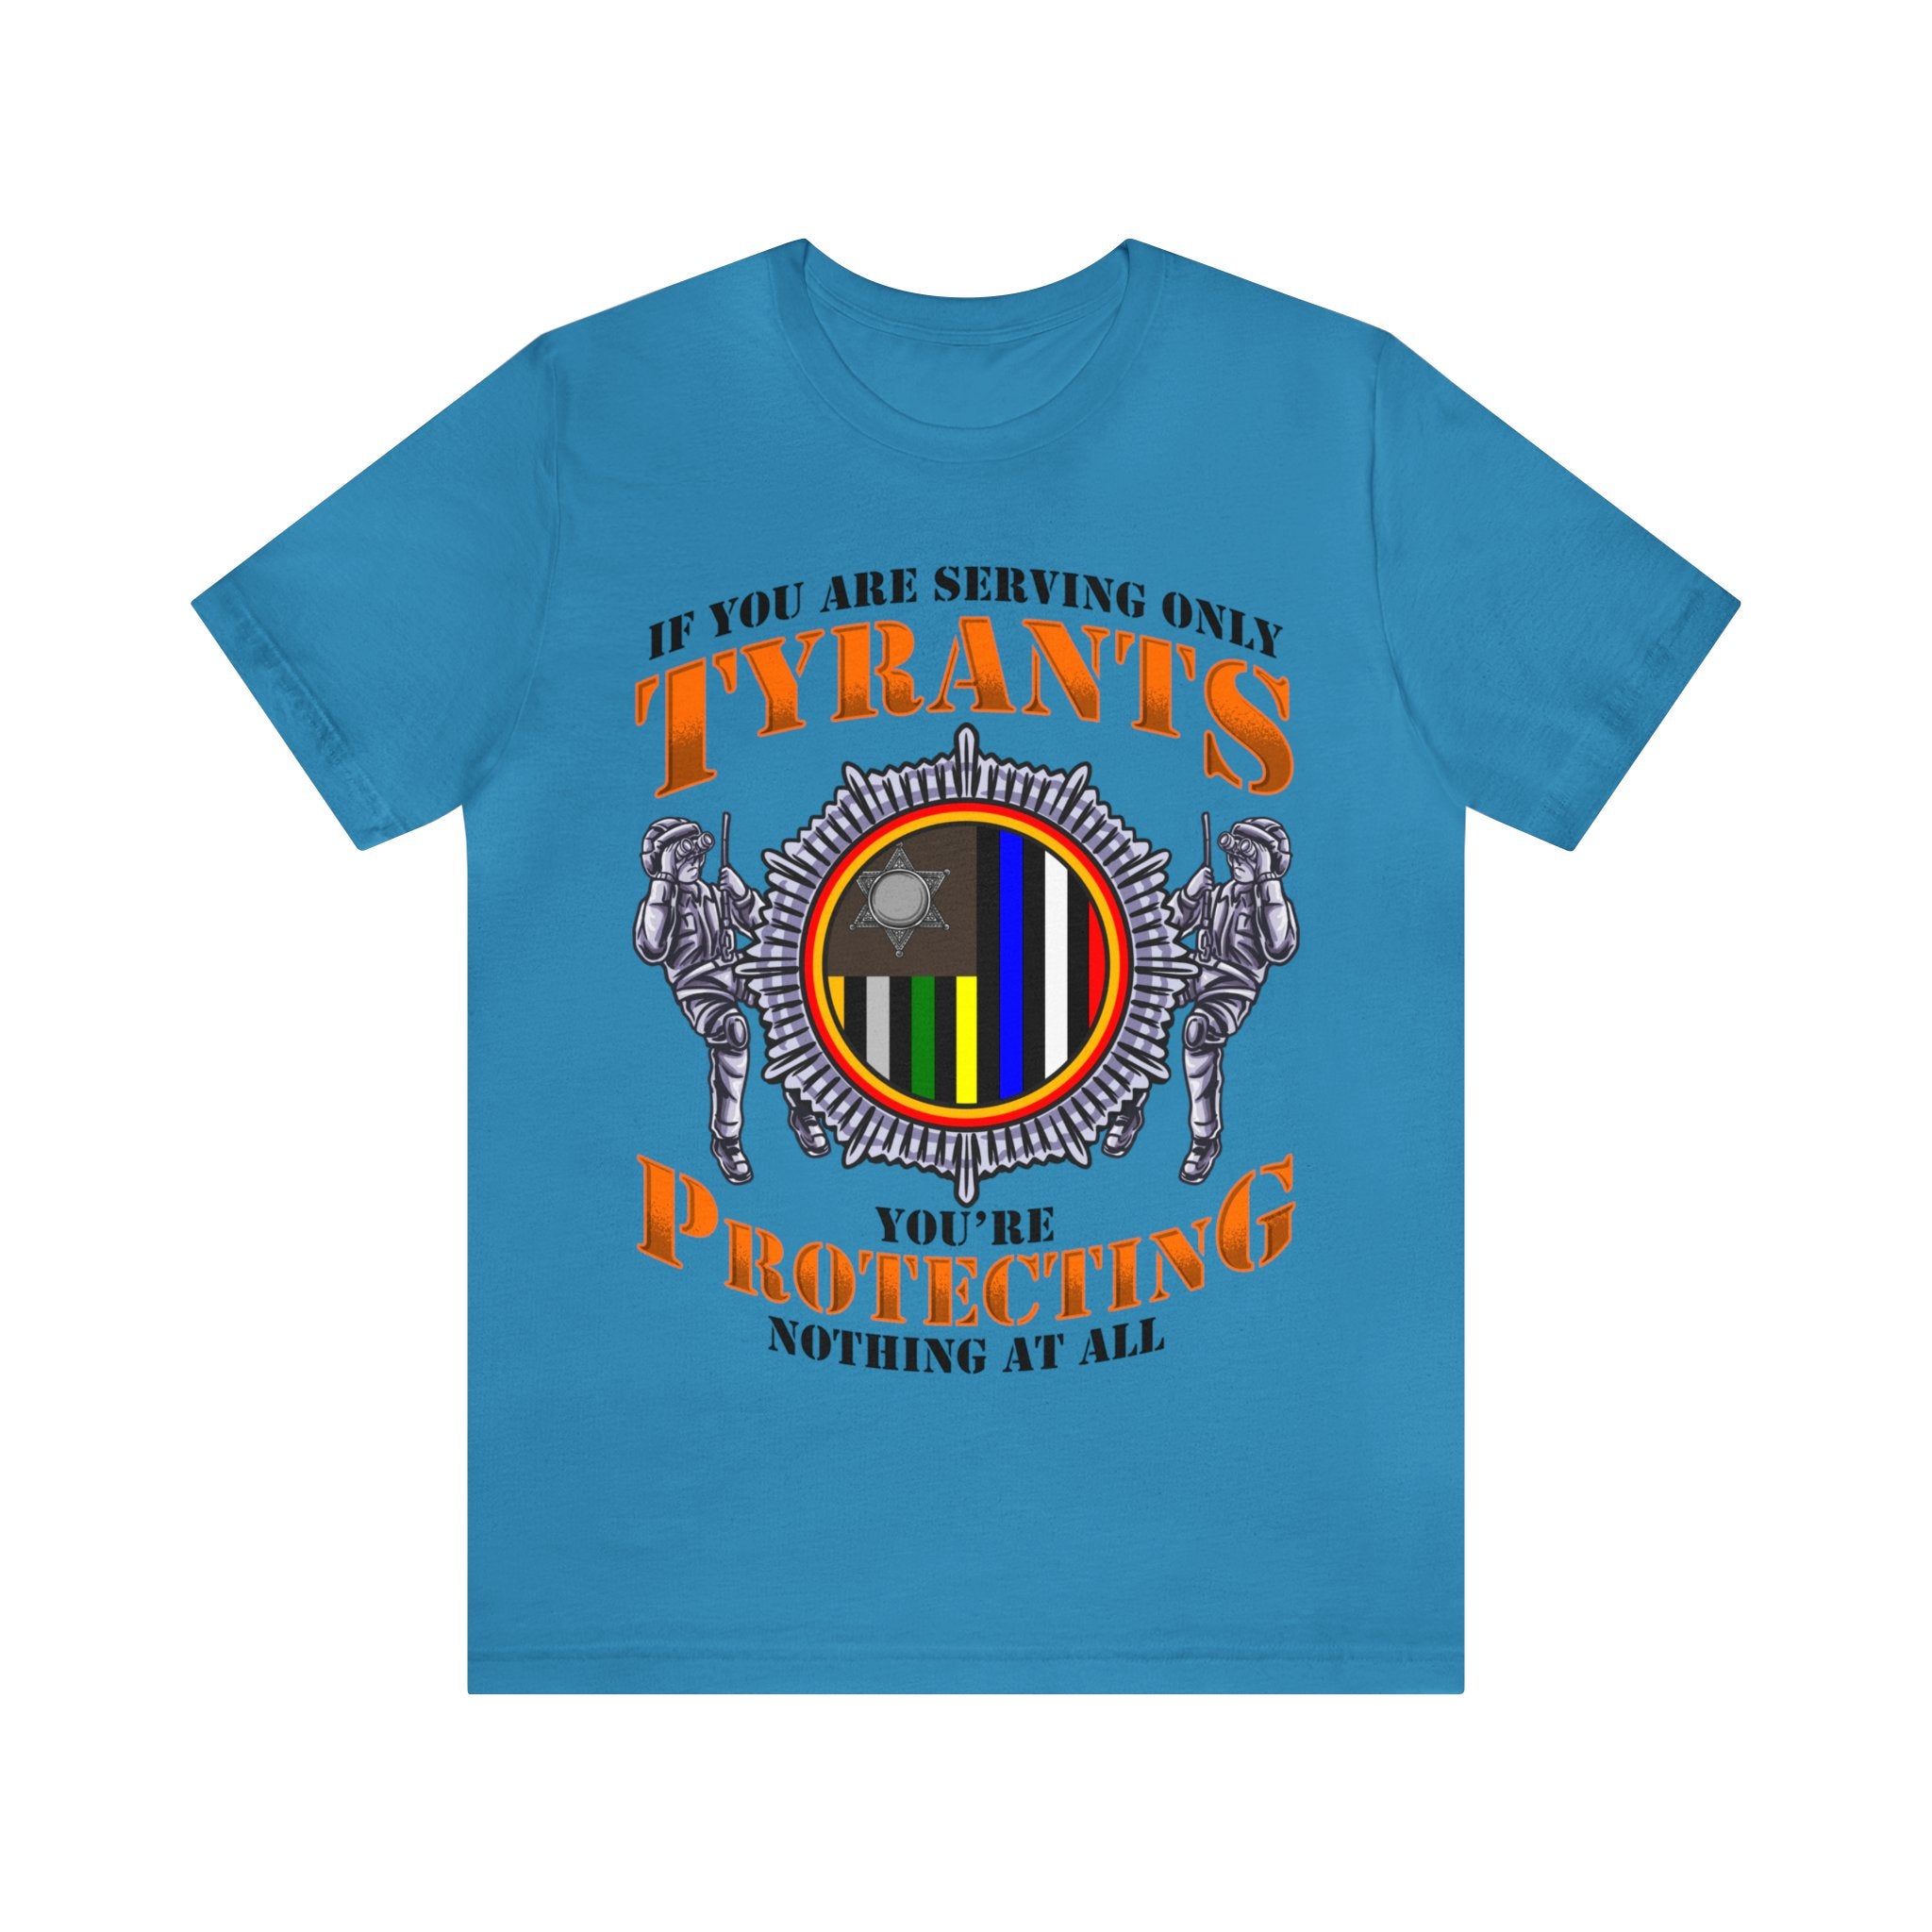 Thin Search & Rescue Line Tee - Tyrants/Protecting